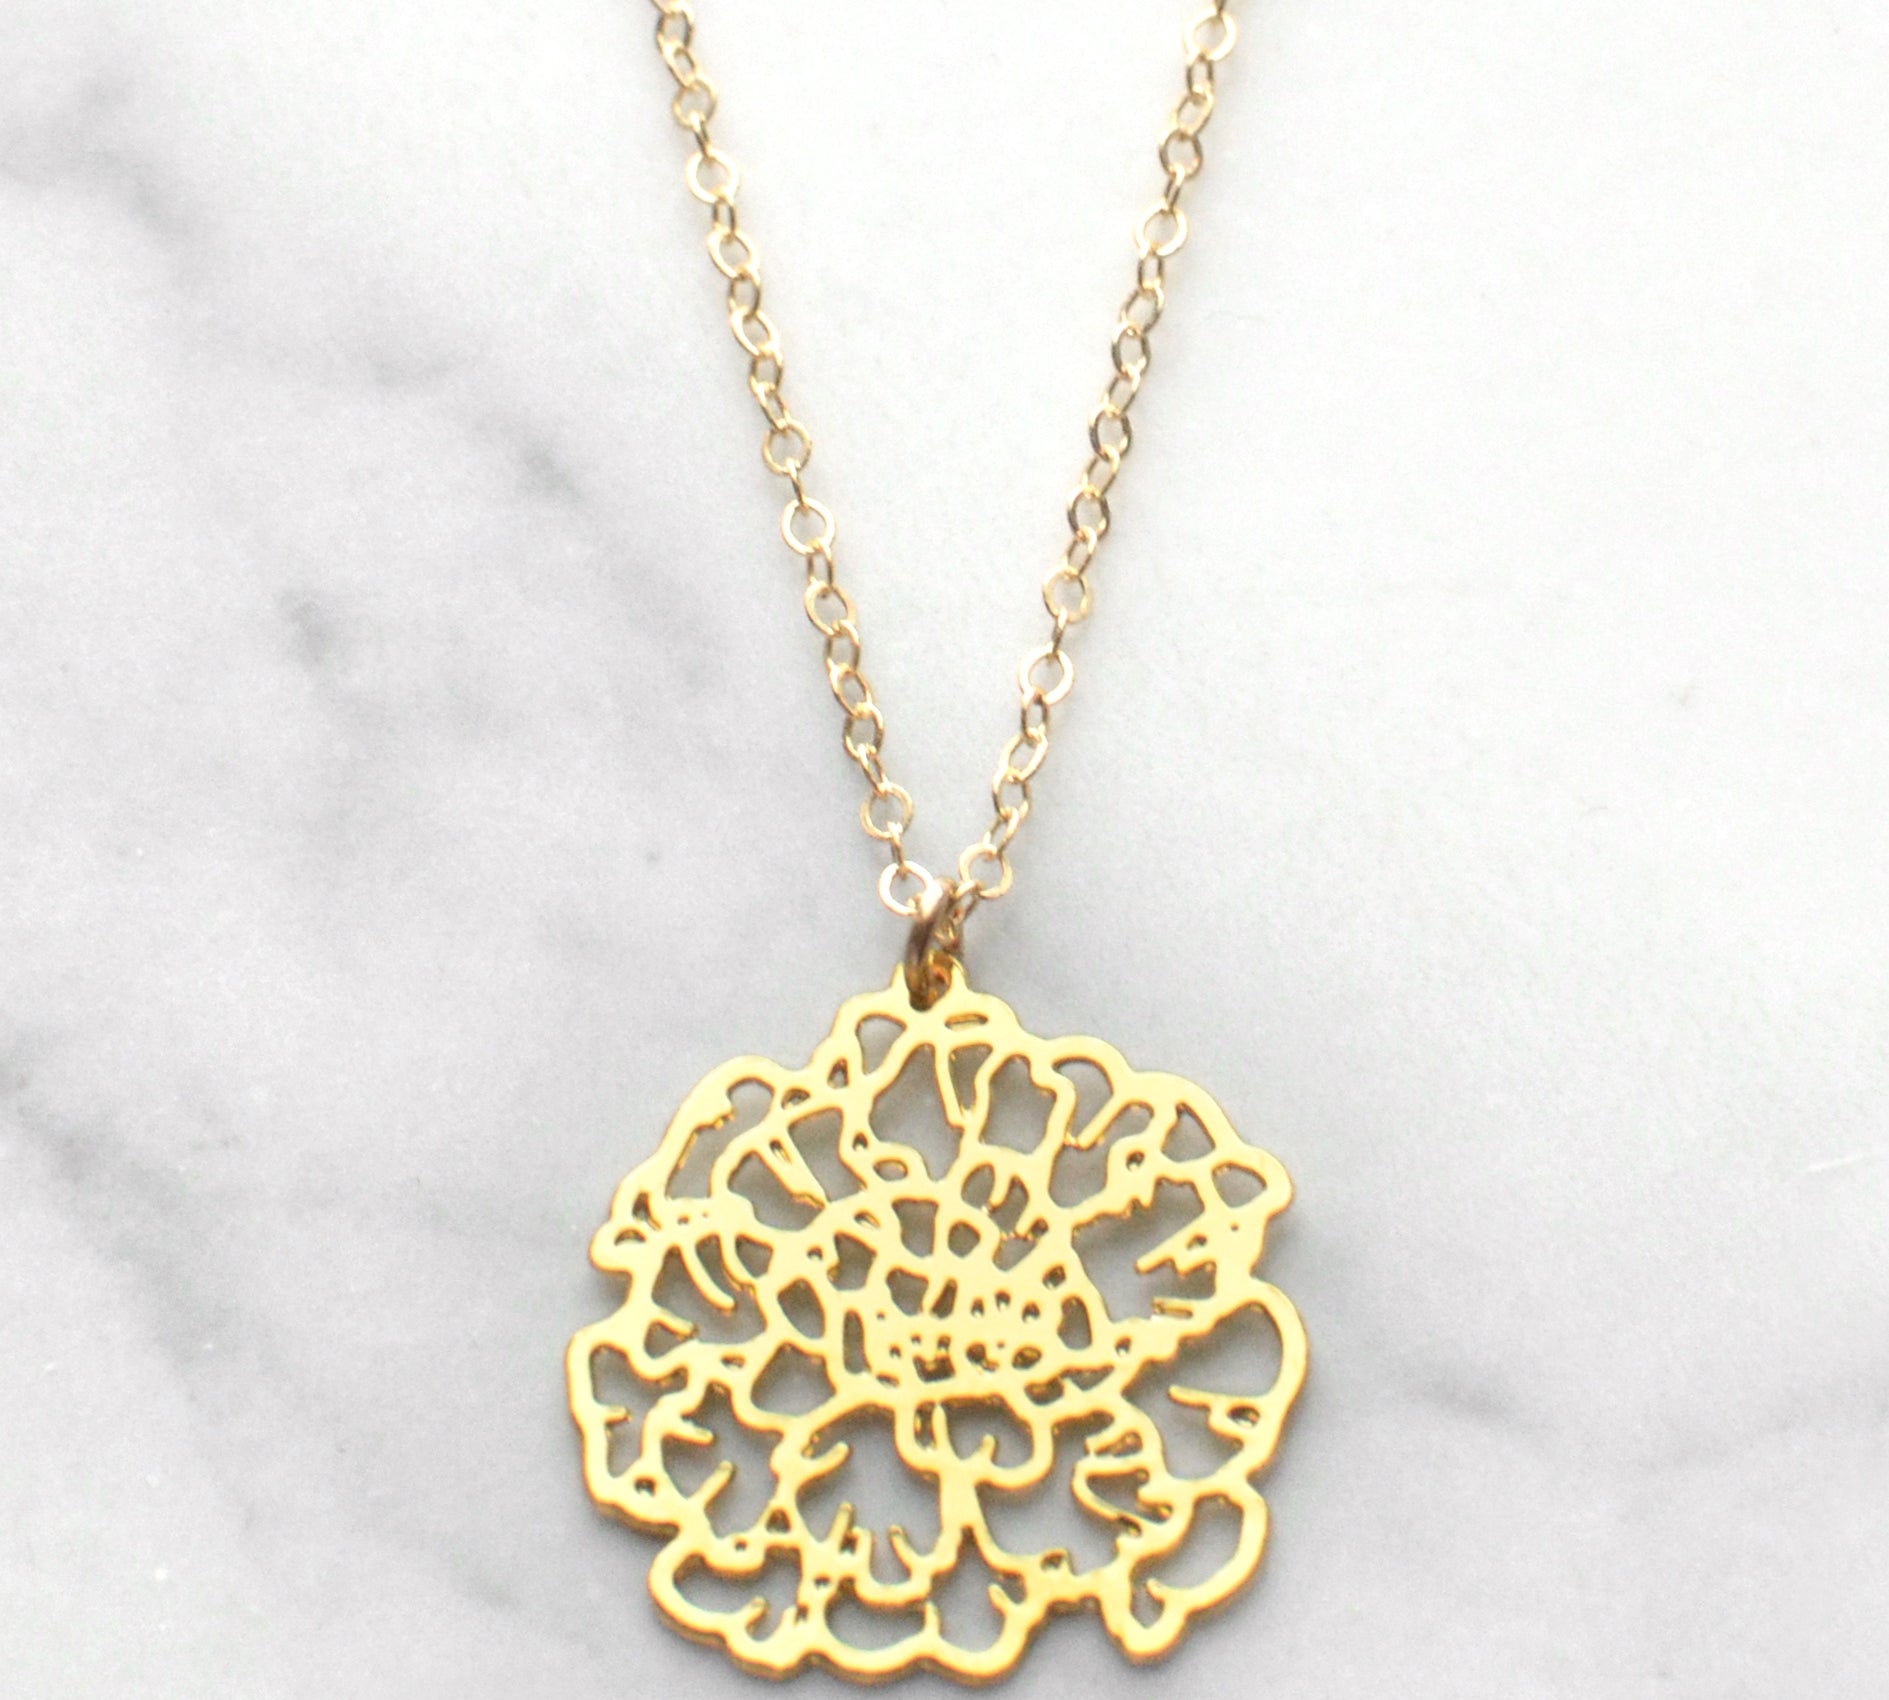 Marigold Necklace - High Quality, Affordable, Whimsical, Hand Drawn Necklace - October Birthday Gift - Available in Gold and Silver - Made in USA - Brevity Jewelry